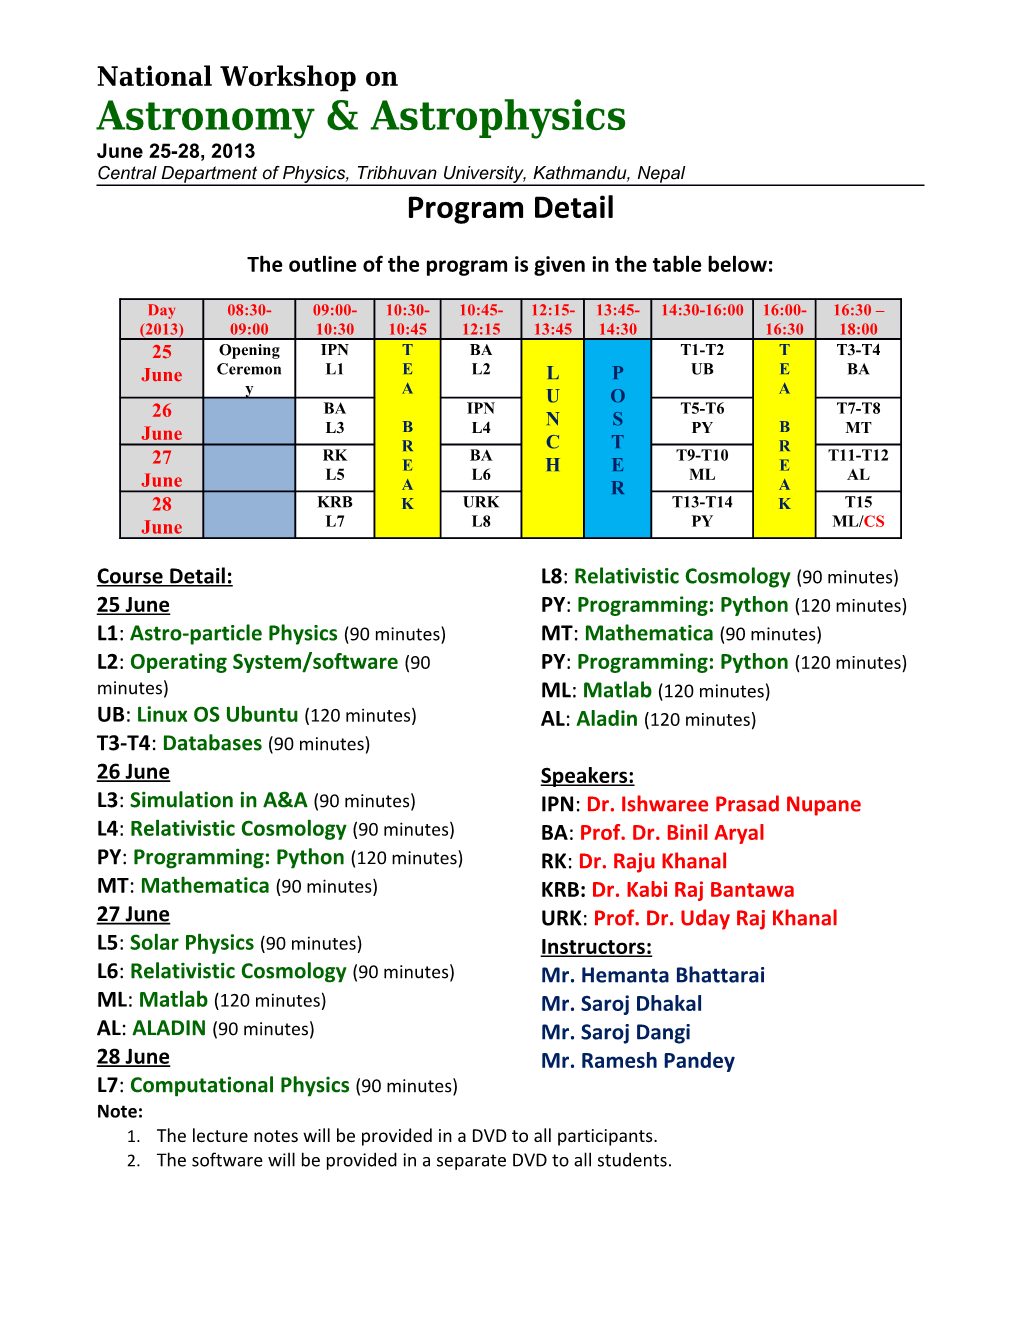 The Outline of the Program Is Given in the Table Below